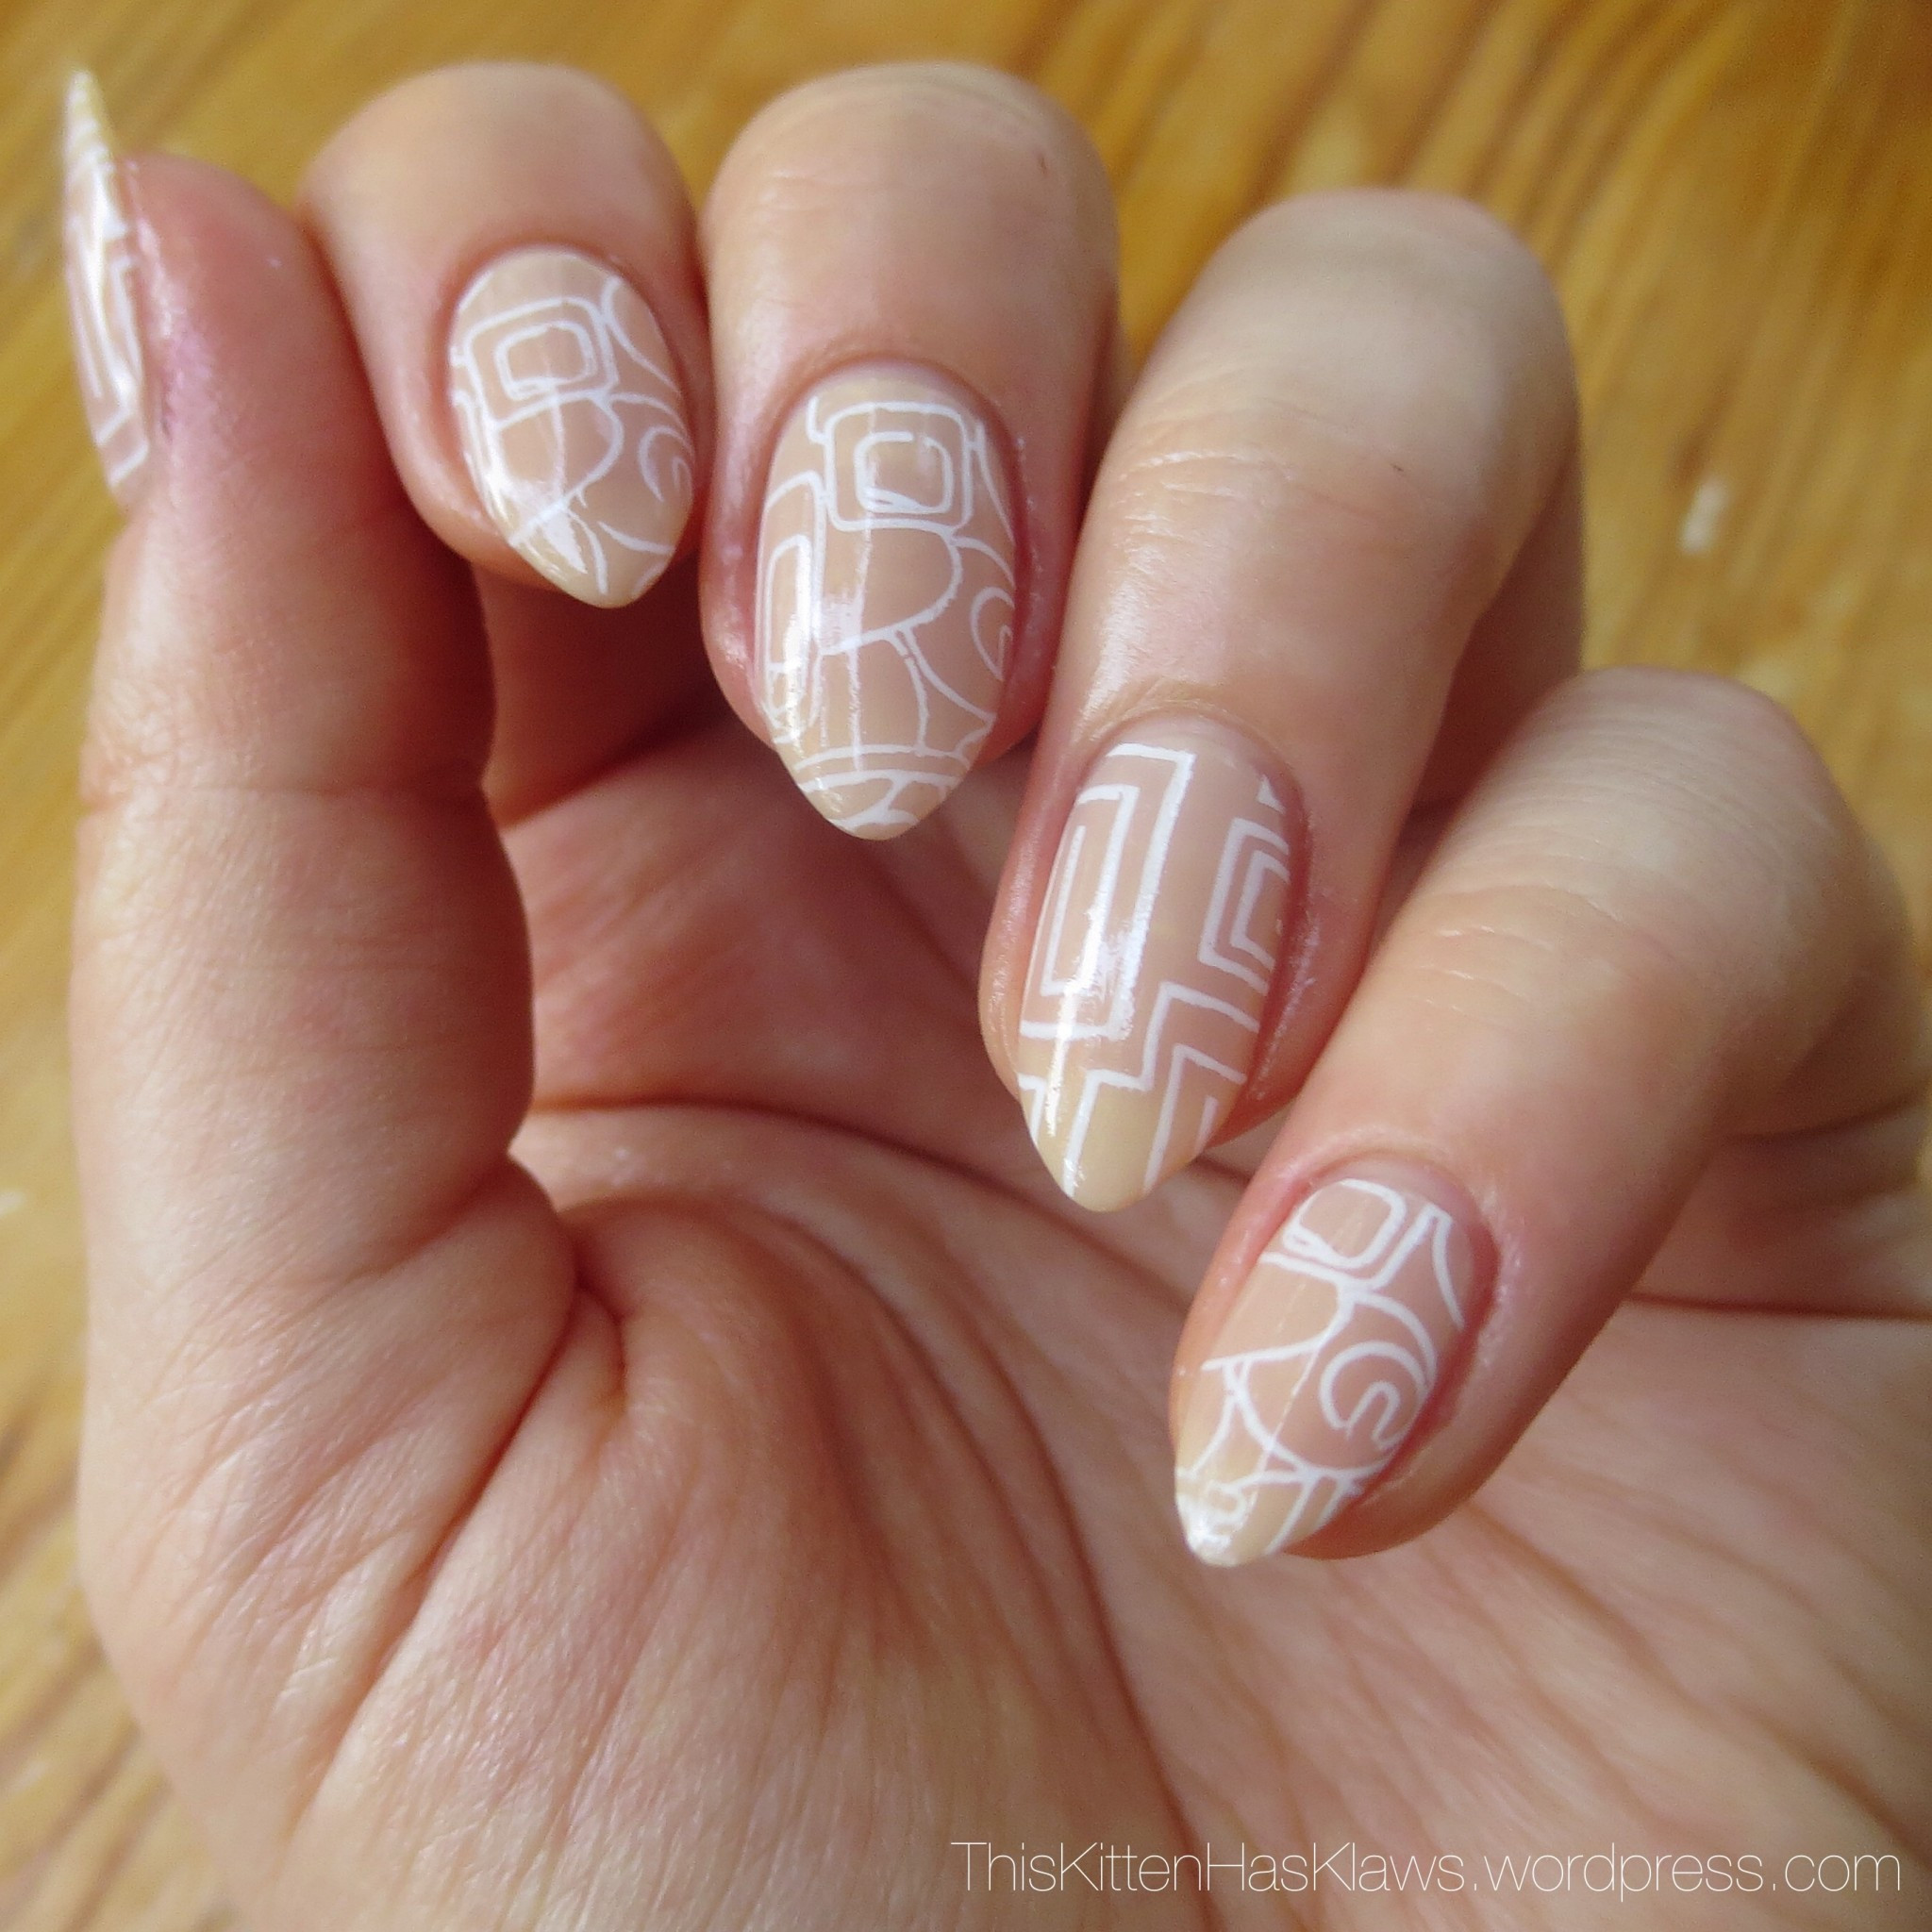 Pretty Almond Nails
 Top 30 Spectacular Almond Acrylic Nails